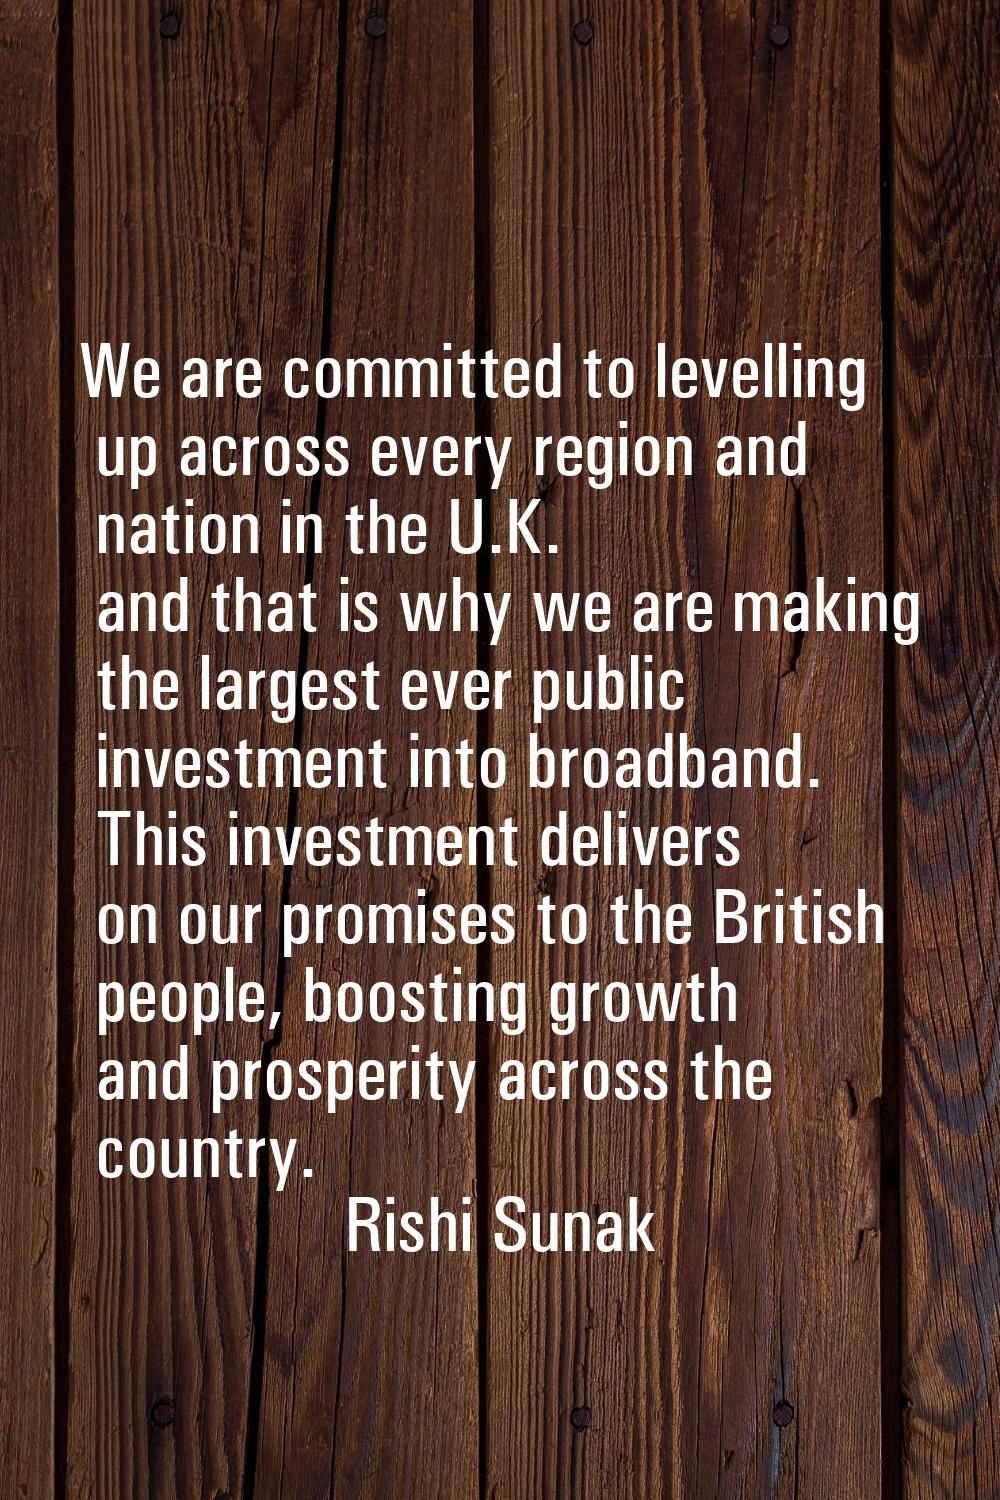 We are committed to levelling up across every region and nation in the U.K. and that is why we are 